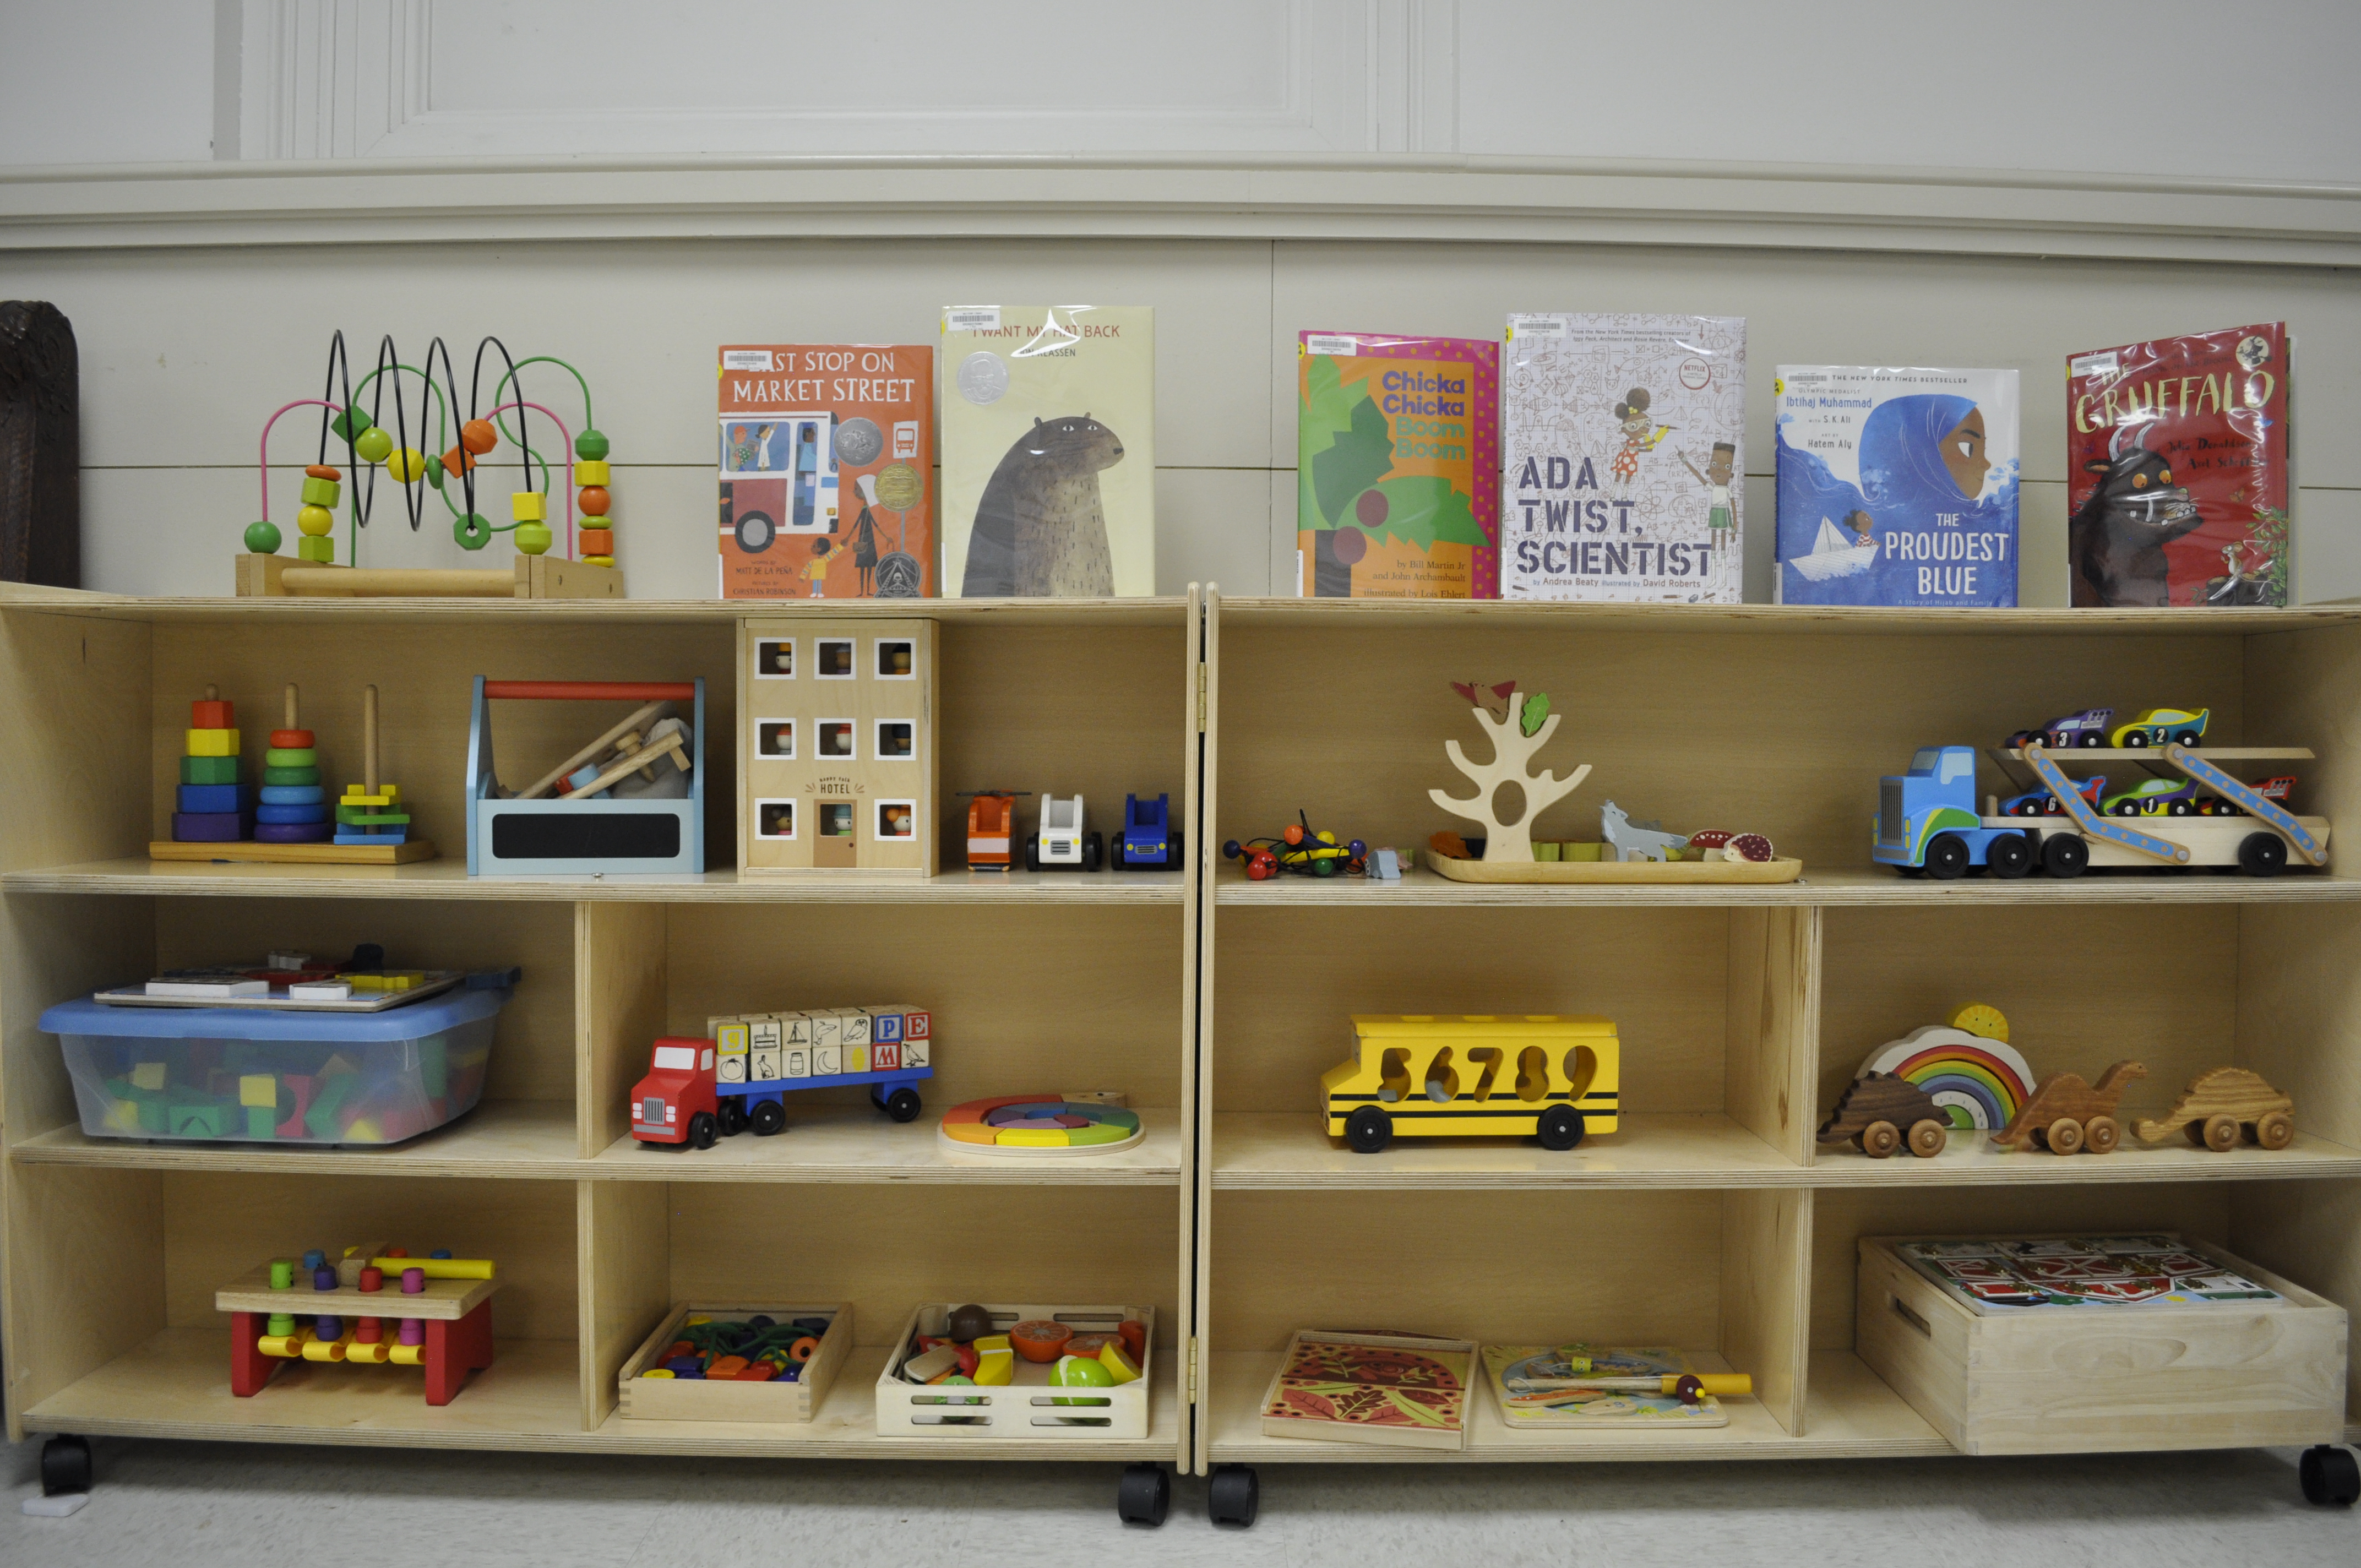 A book shelf with children's picture books and wooden toys.